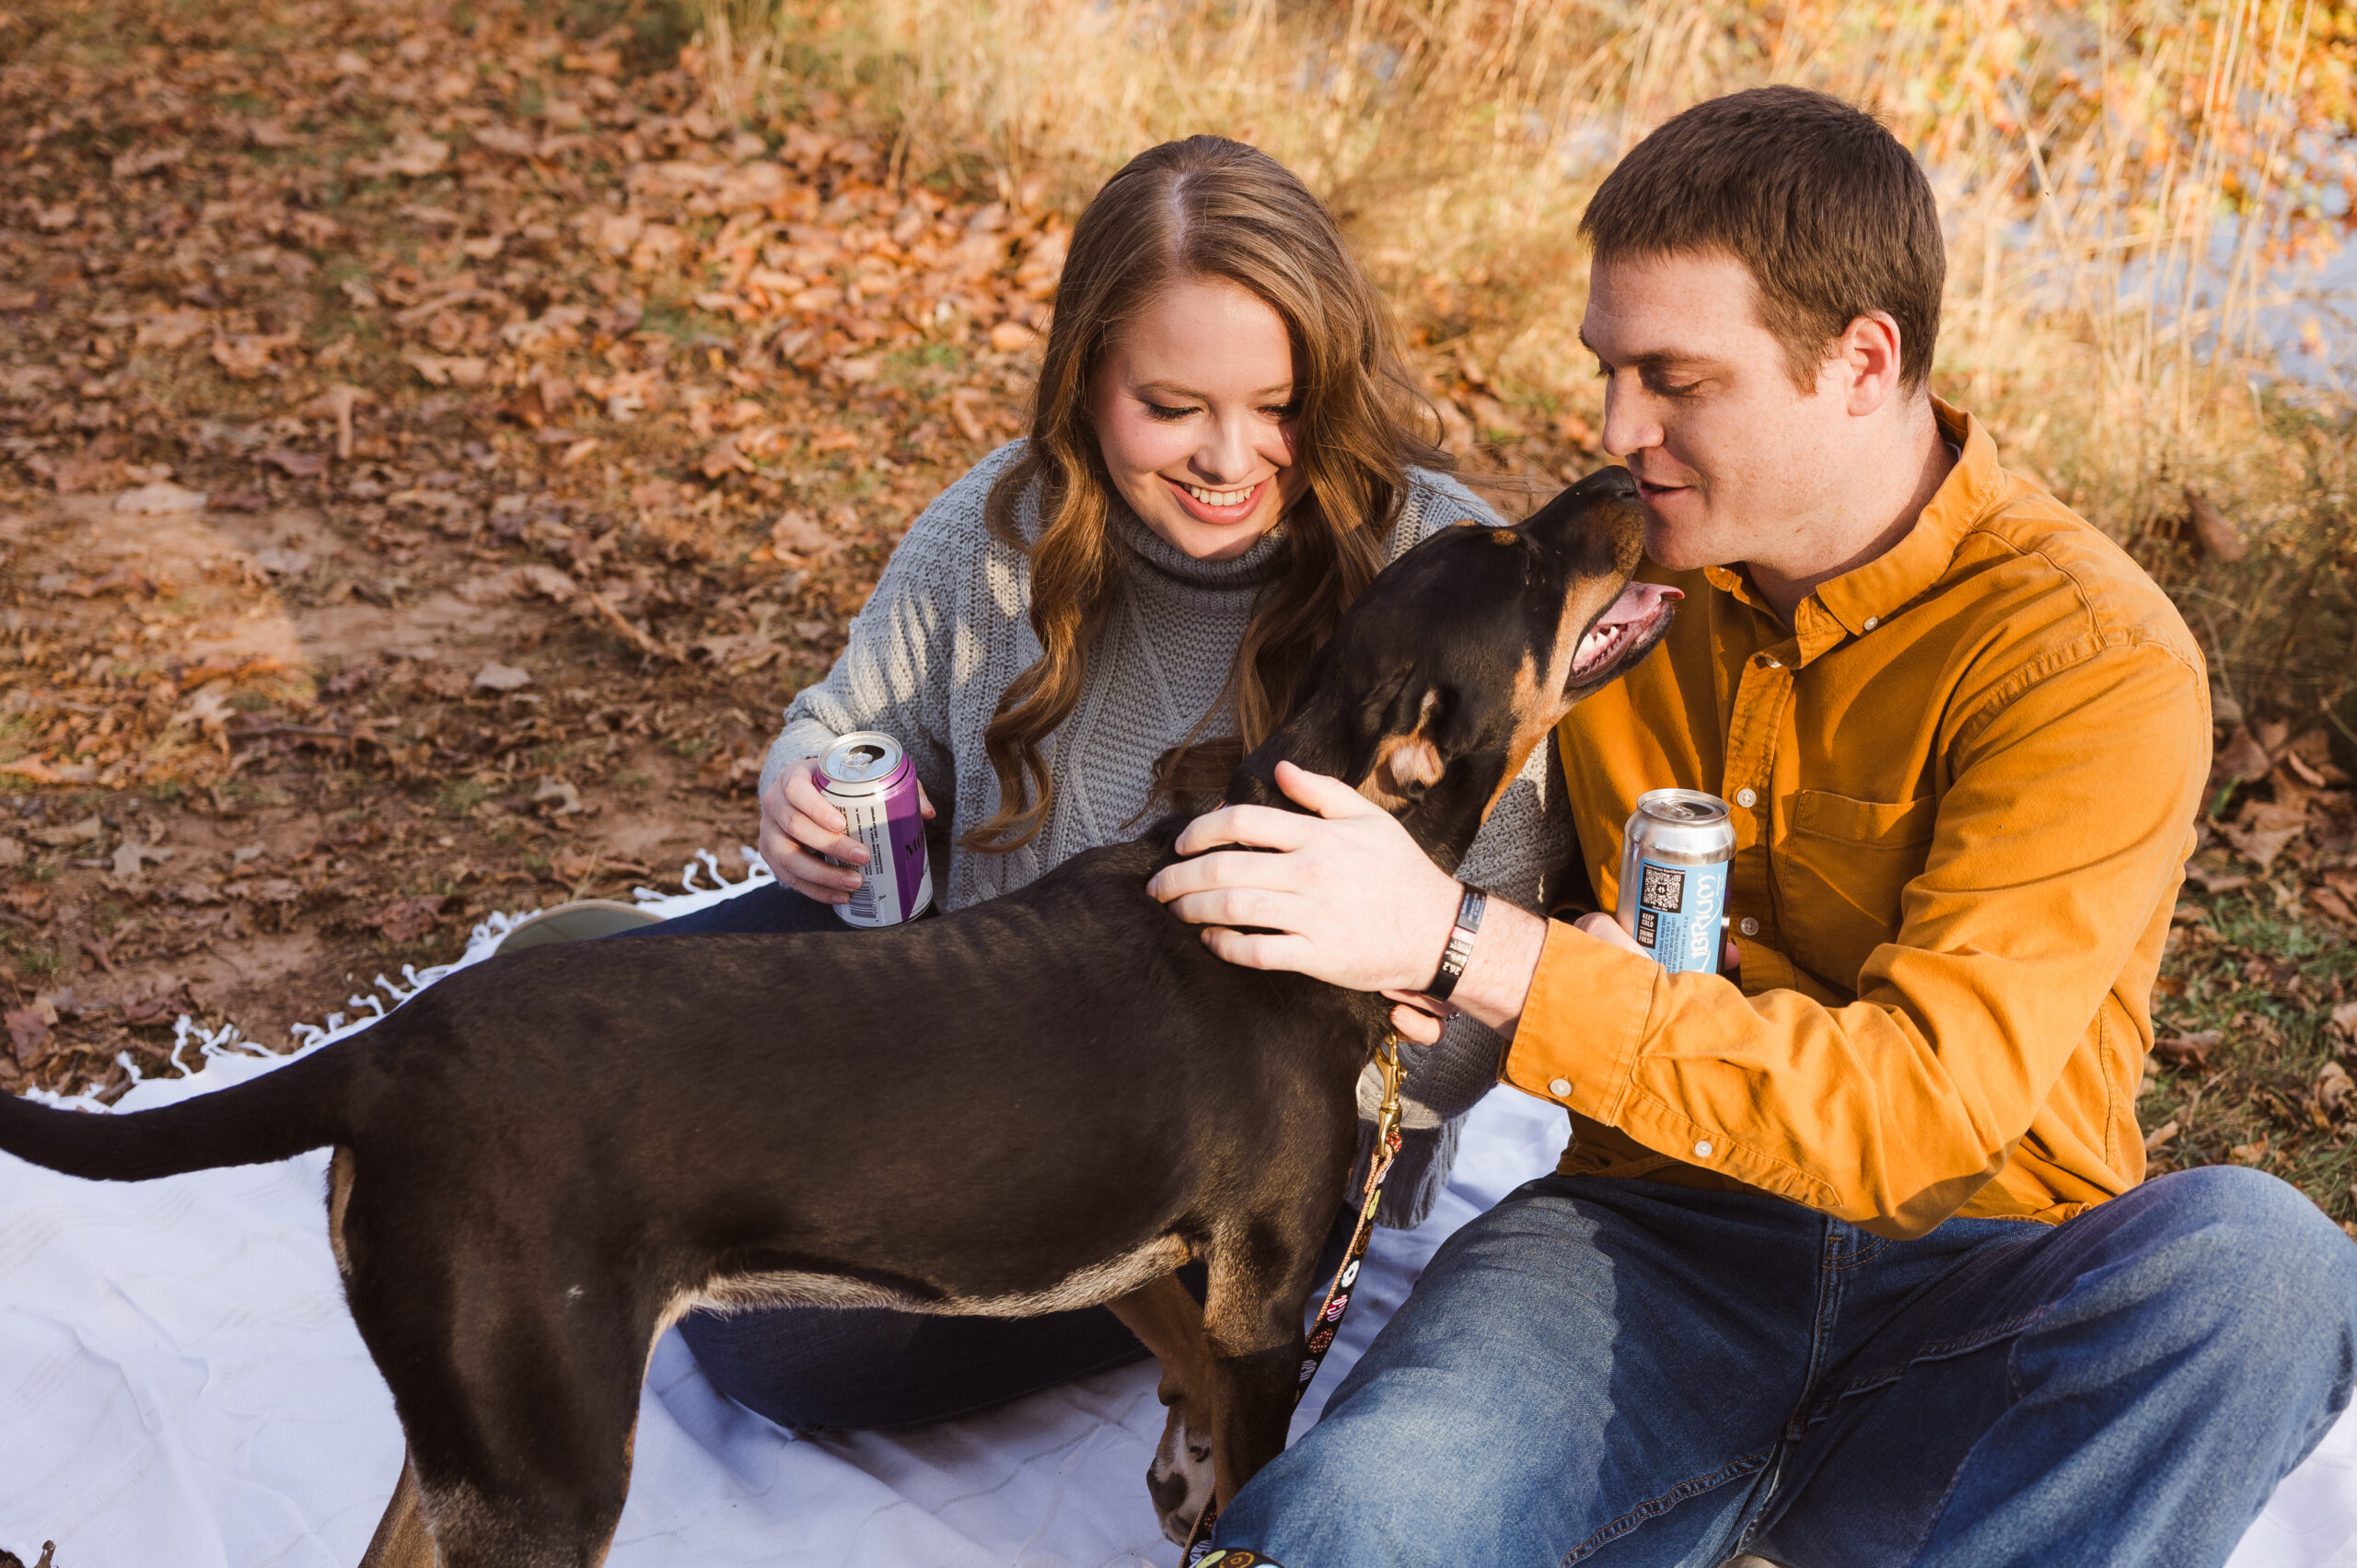 duke-island-park-nj-engagement-photos-with-a-dog-by-suess-moments